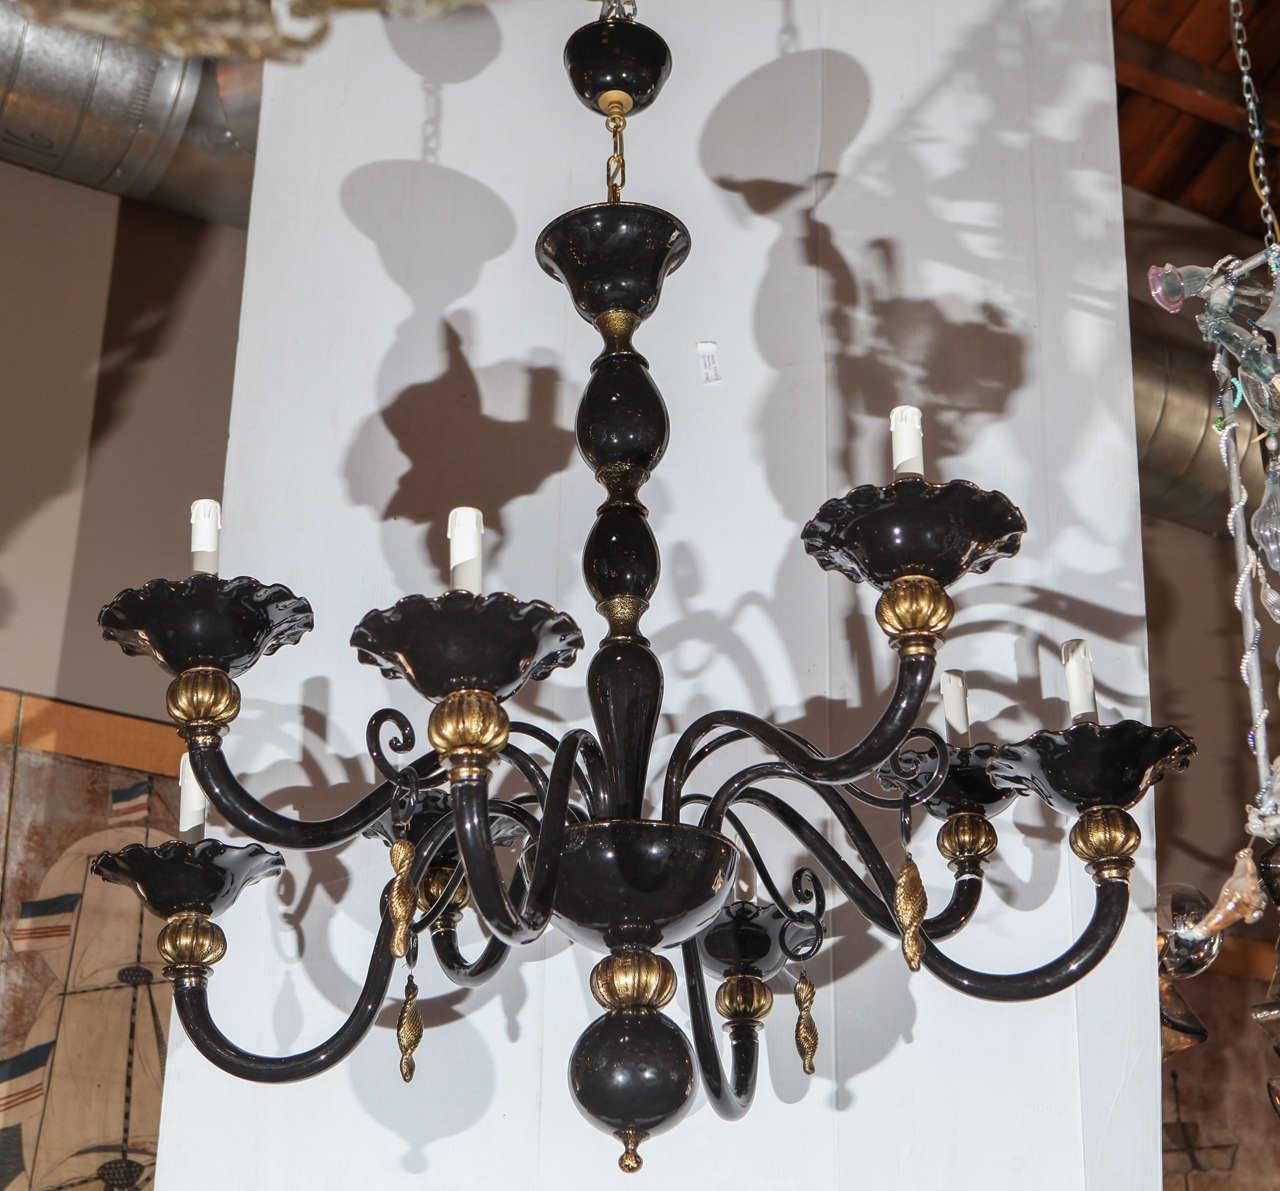 Italian Venetian chandelier with hand blown black Murano glass and gold Murano glass details / Made in Italy circa 1960’s
8 lights / E12 or E14 type / max 40W each
Diameter: 40 inches / Height: 51 inches plus chain and canopy
1 in stock in Palm